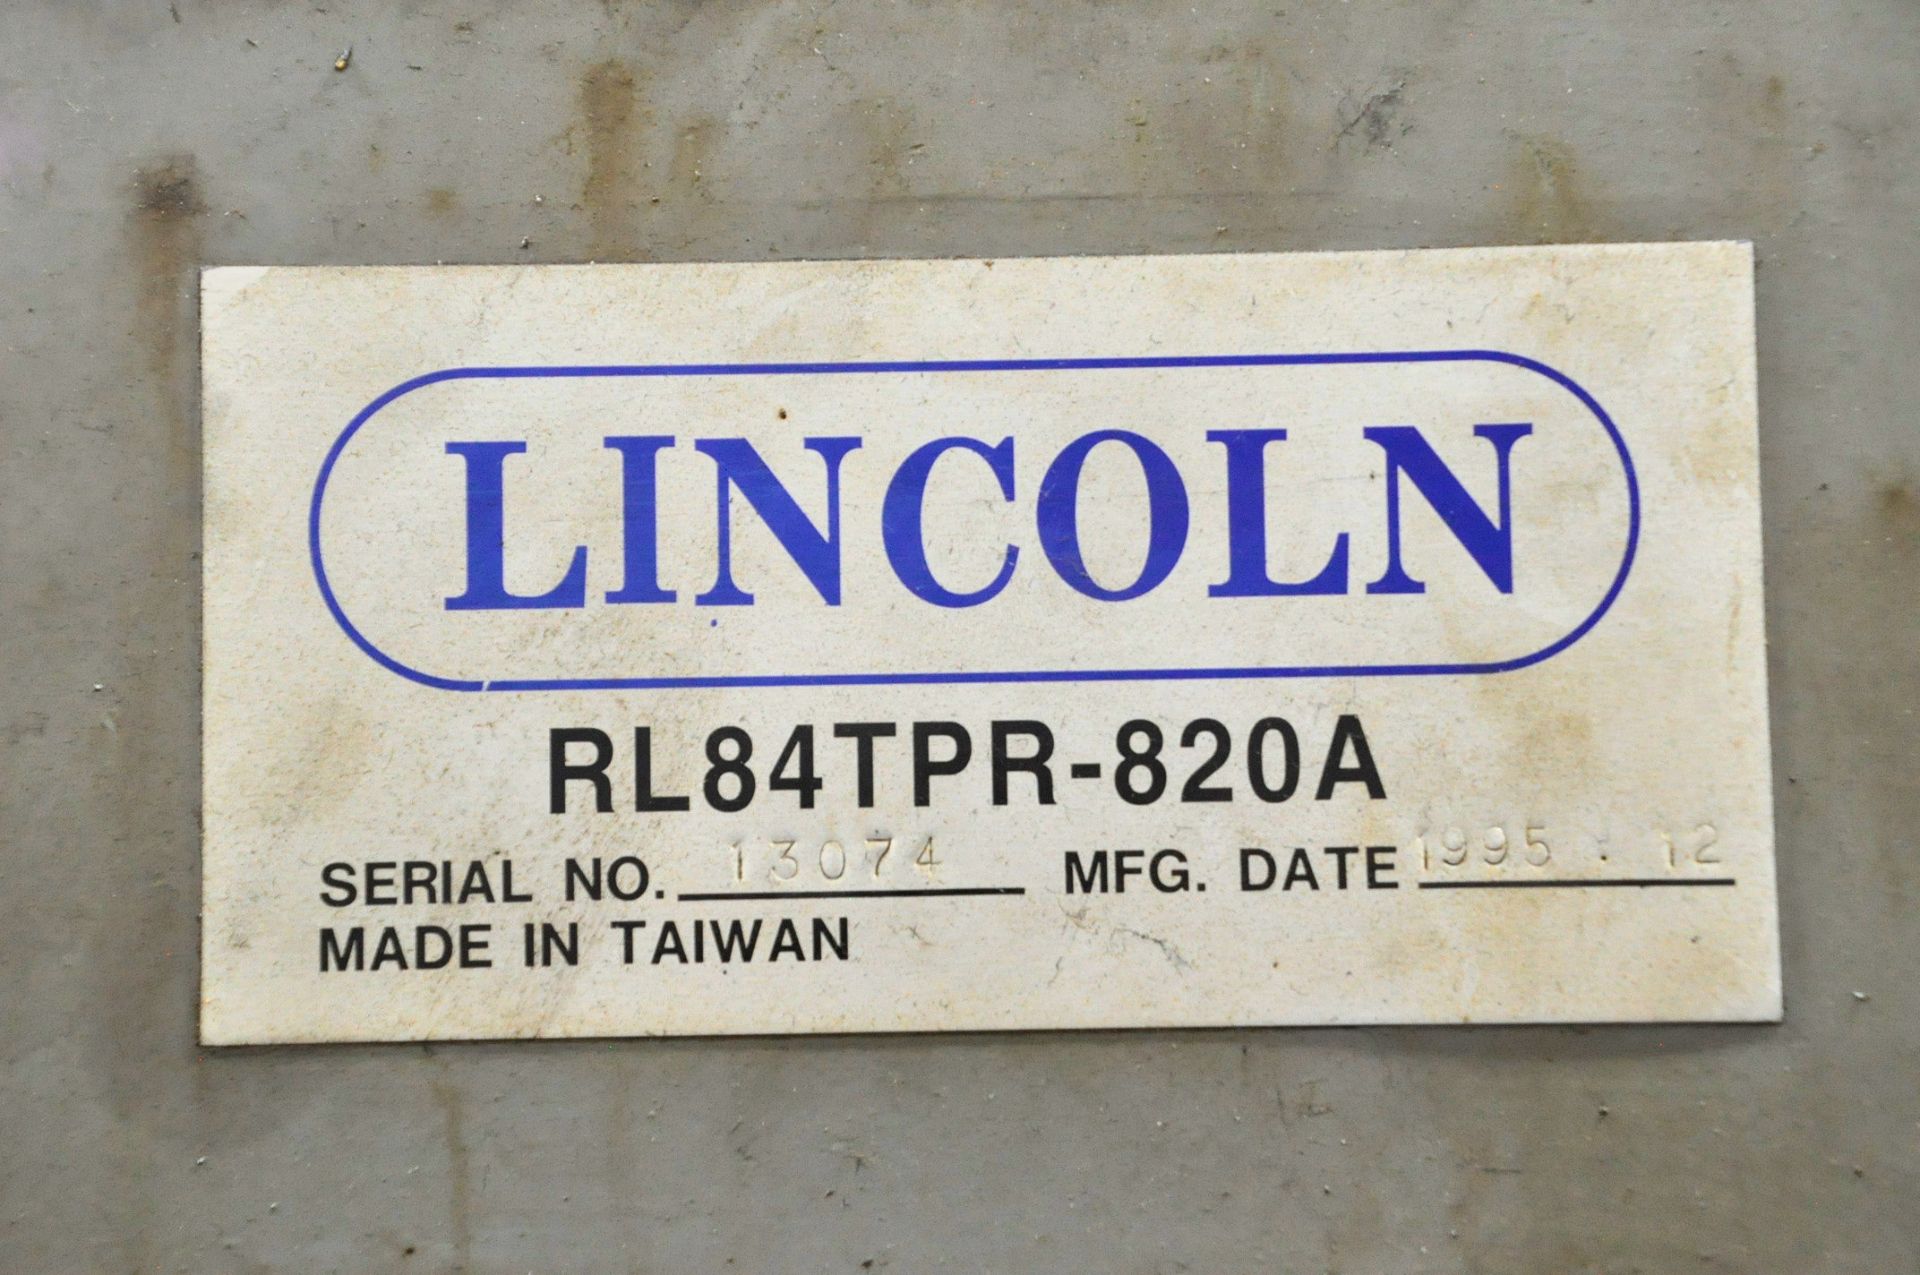 Lincoln RL84TPR-820A 8" x 3' Radial Arm Drill, S/N 13074, 1995 - Image 7 of 7